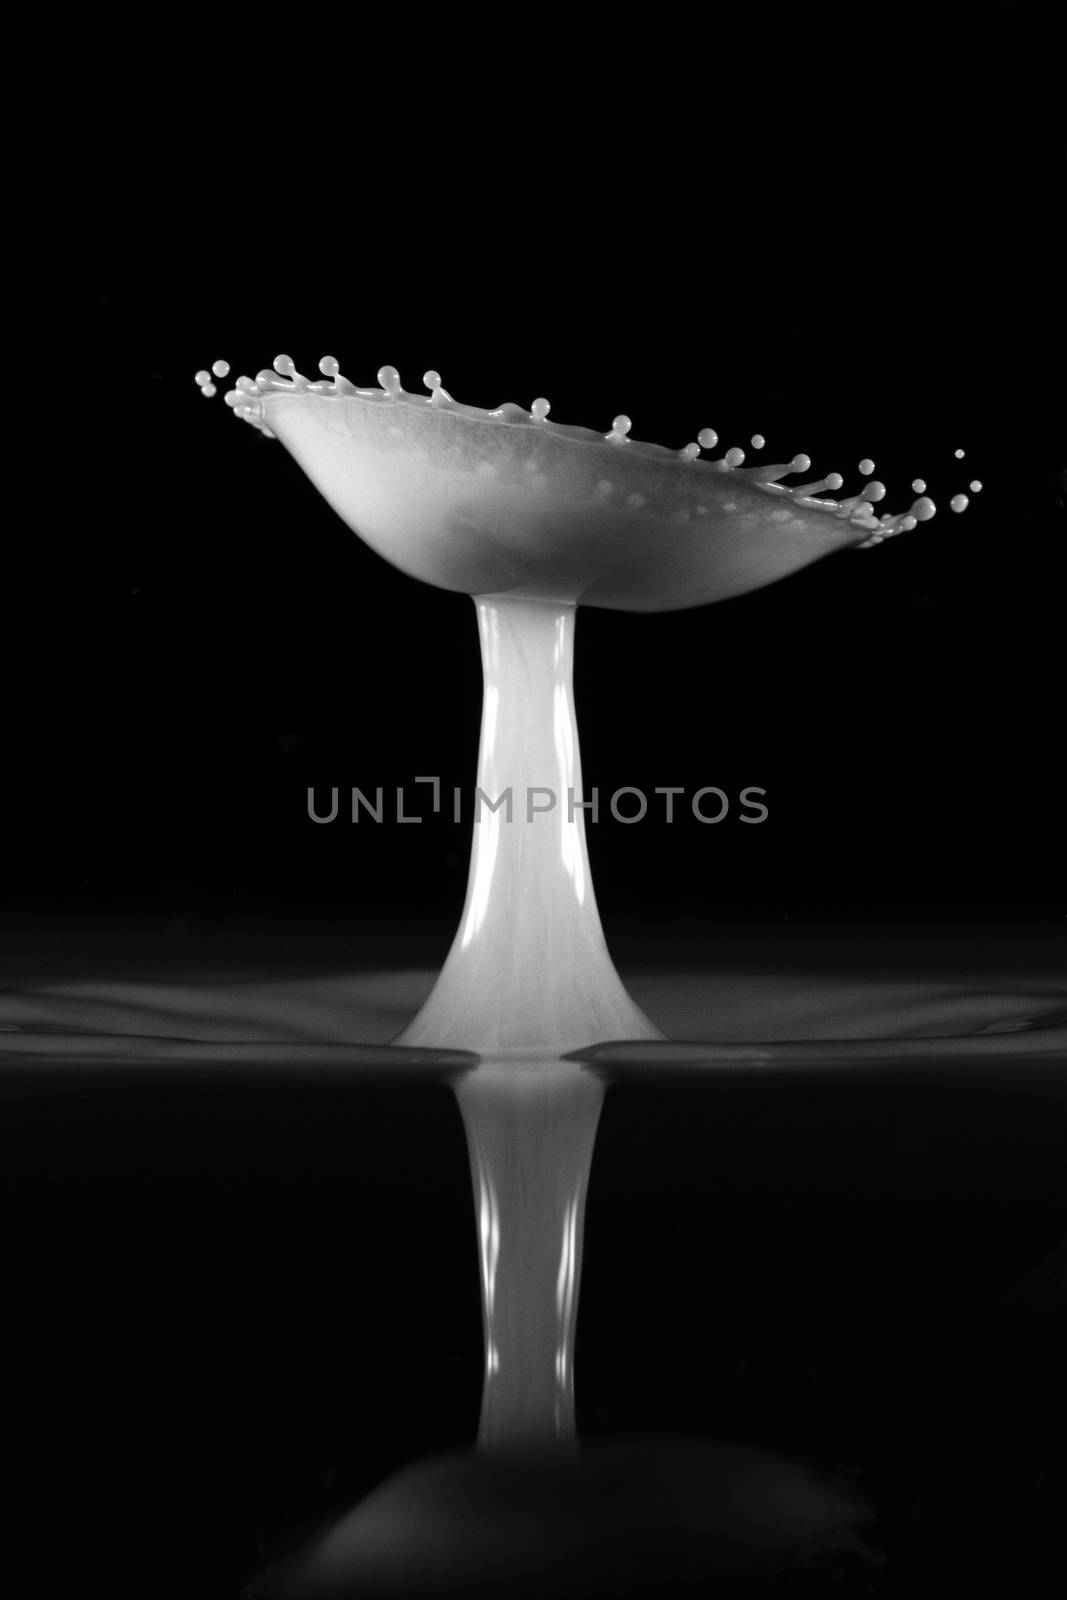 Water drops splash and collide to form an umbrella shape against a dark background, monotone flash photography